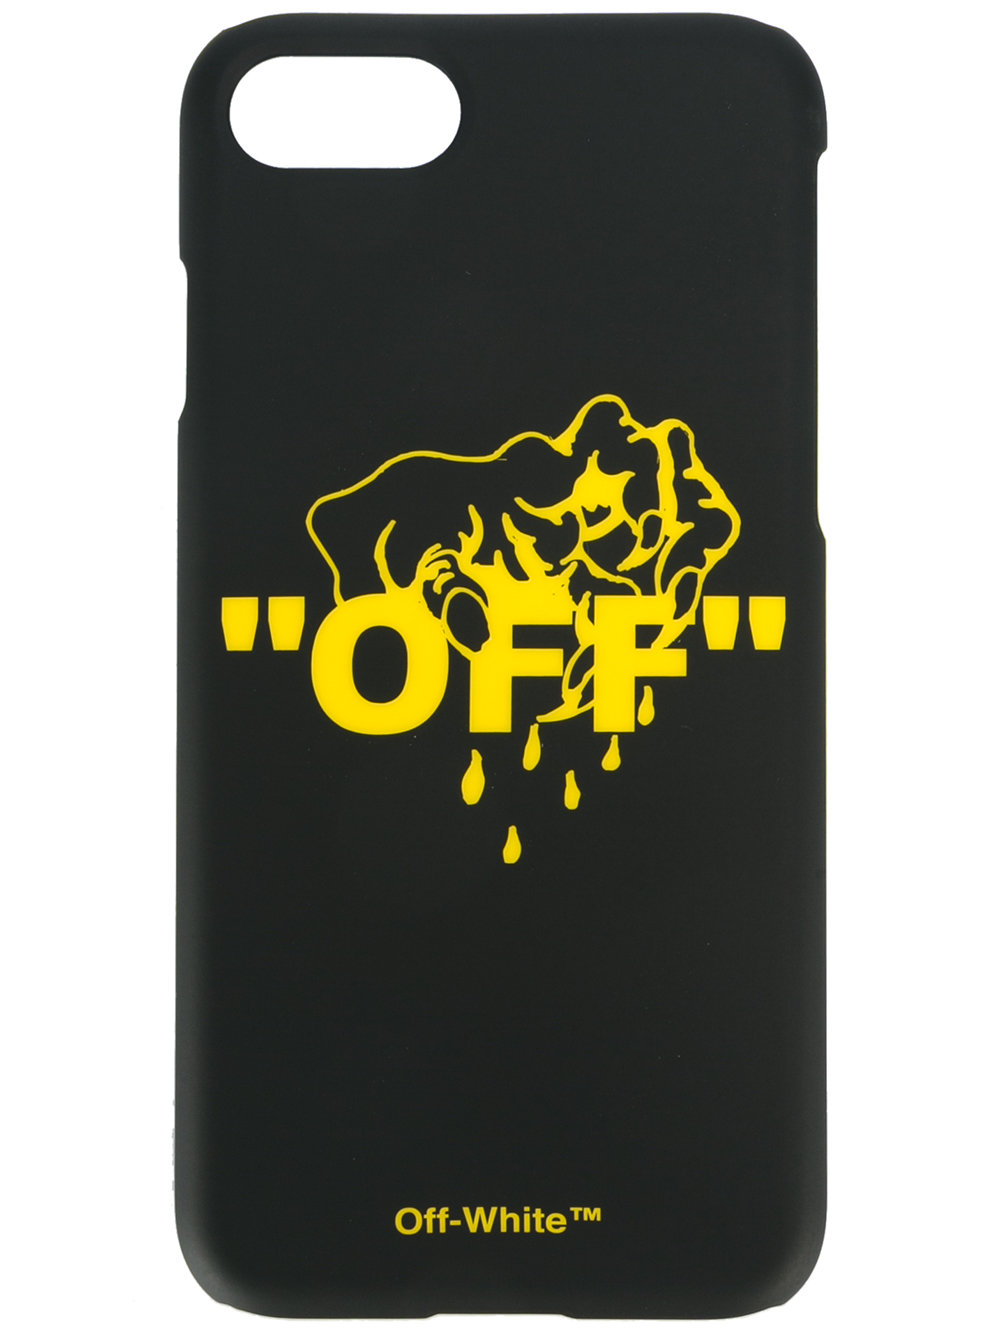 Off-White logo print iPhone 7 case popular stores 1060 BLACK YELLOW Women Lifestyle Phone Computer & Gadgets